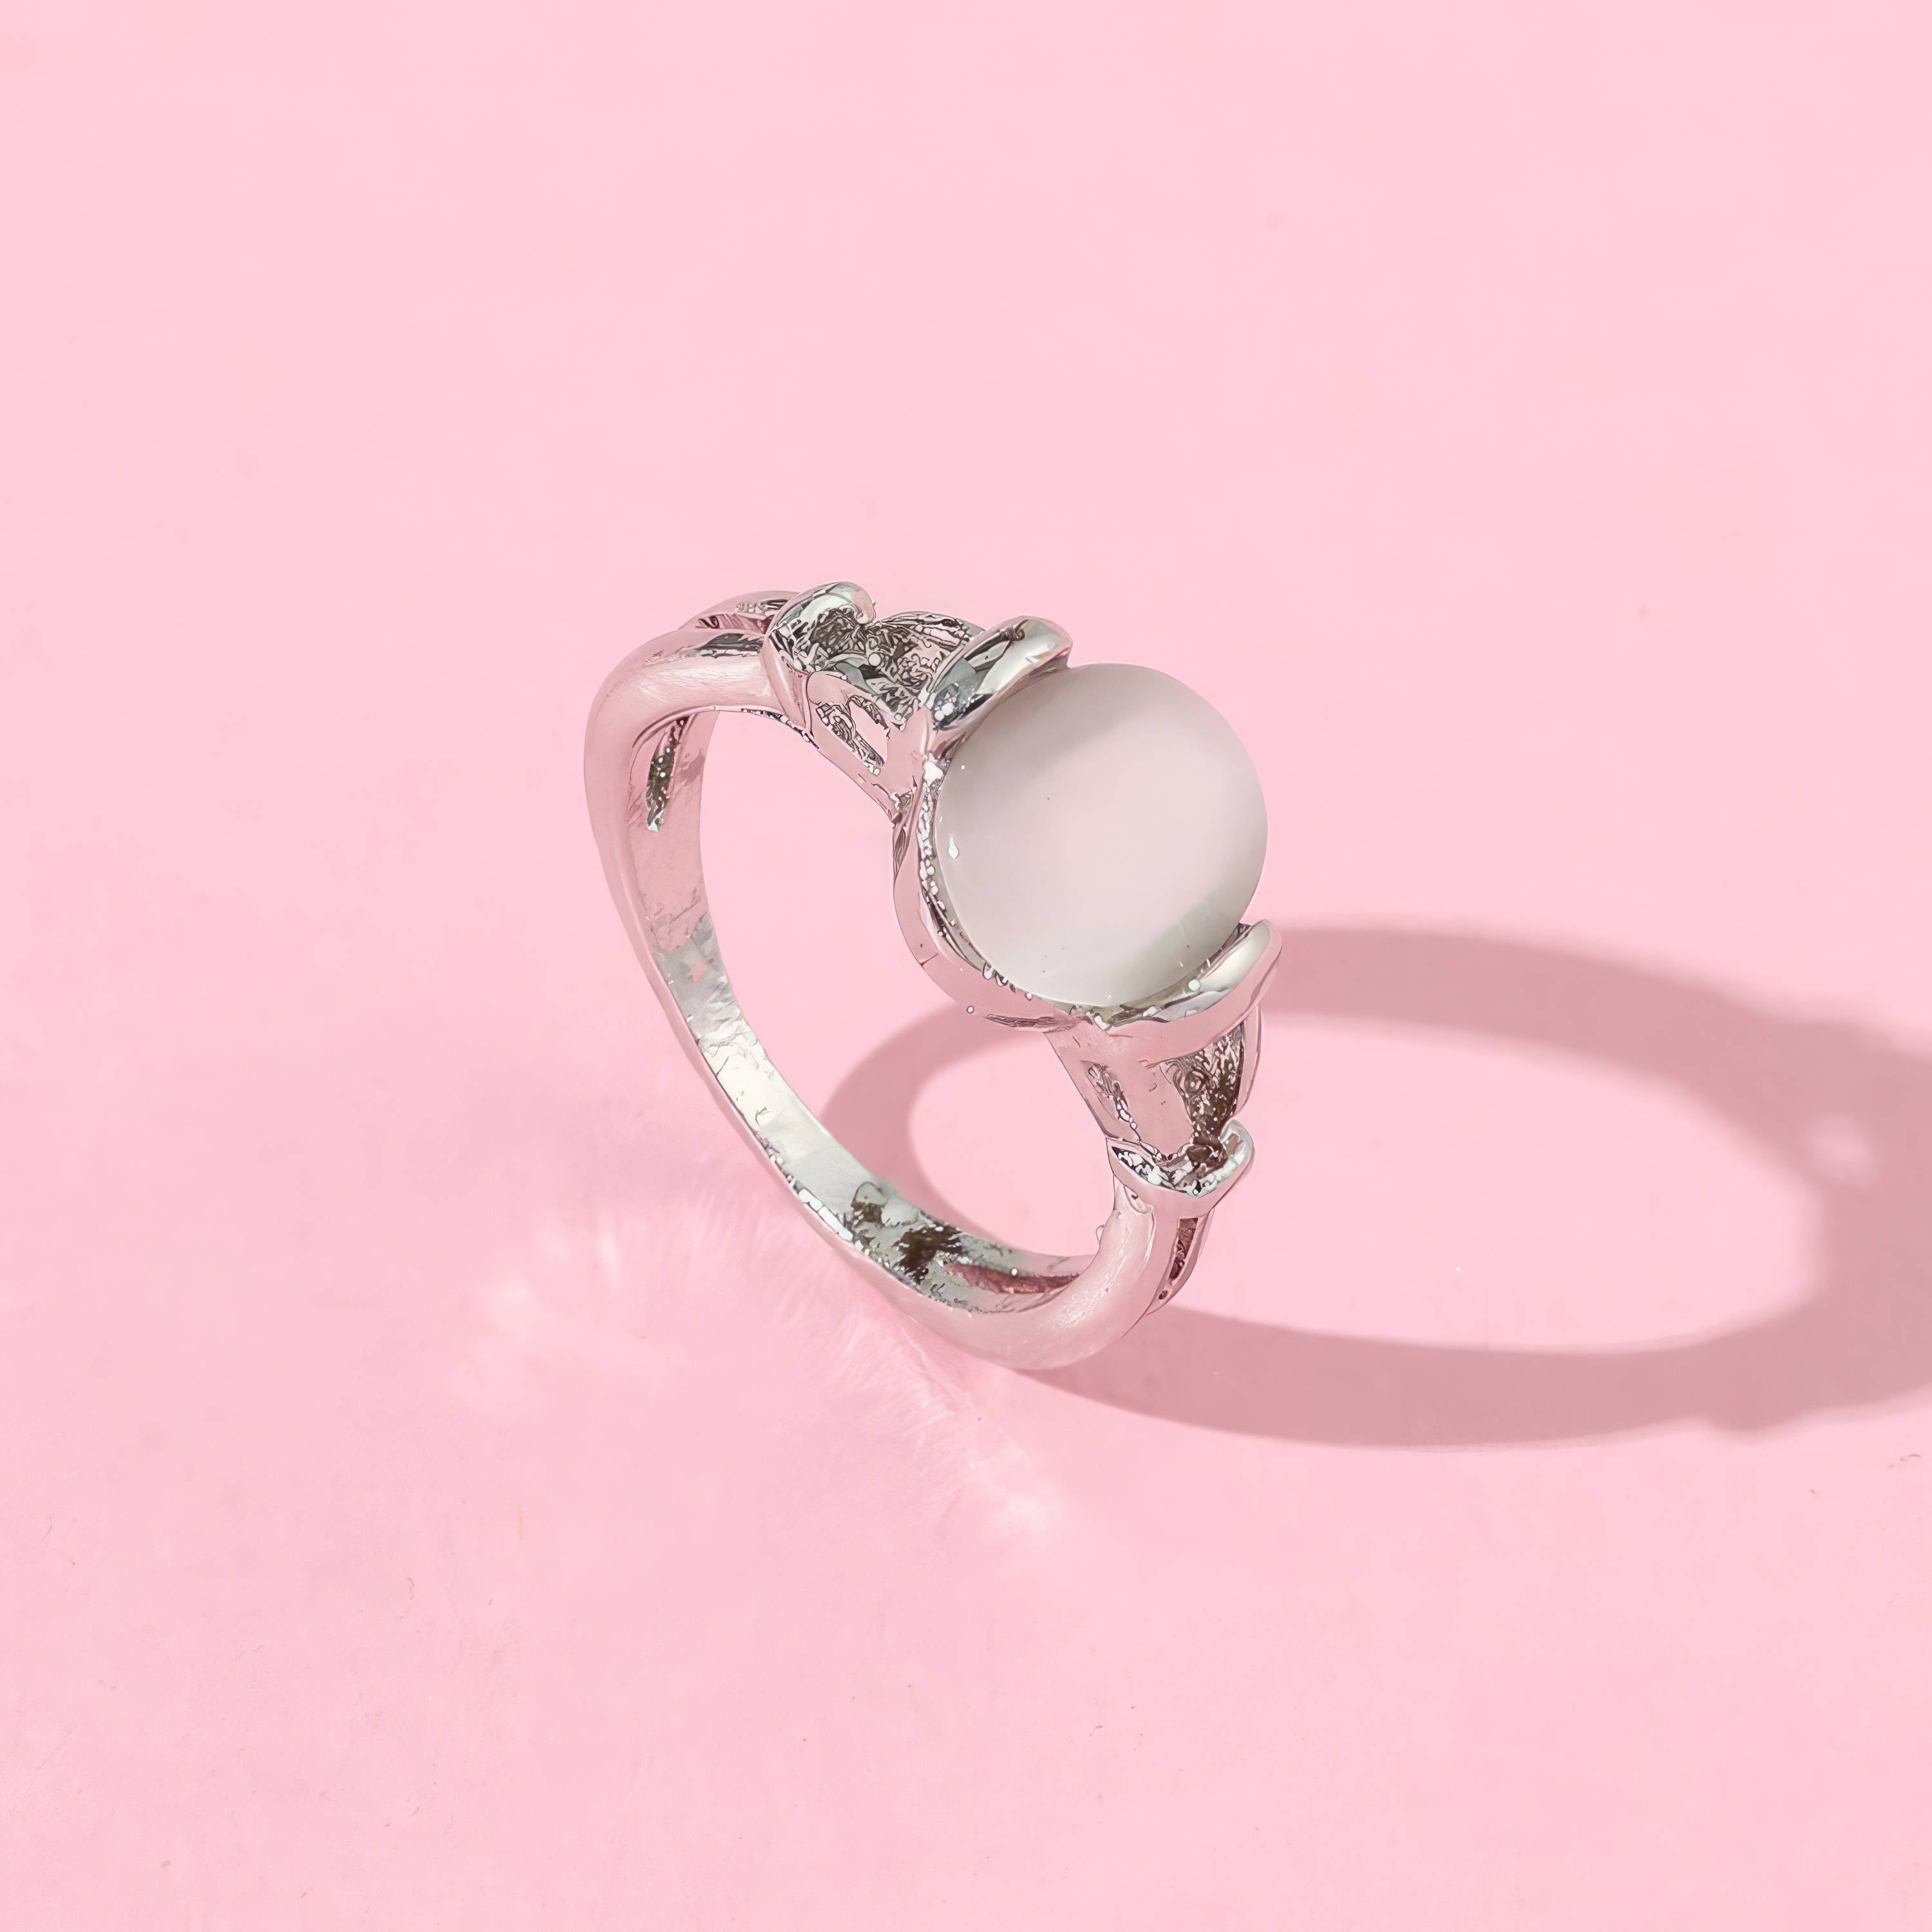 Snow White Beauty Ring